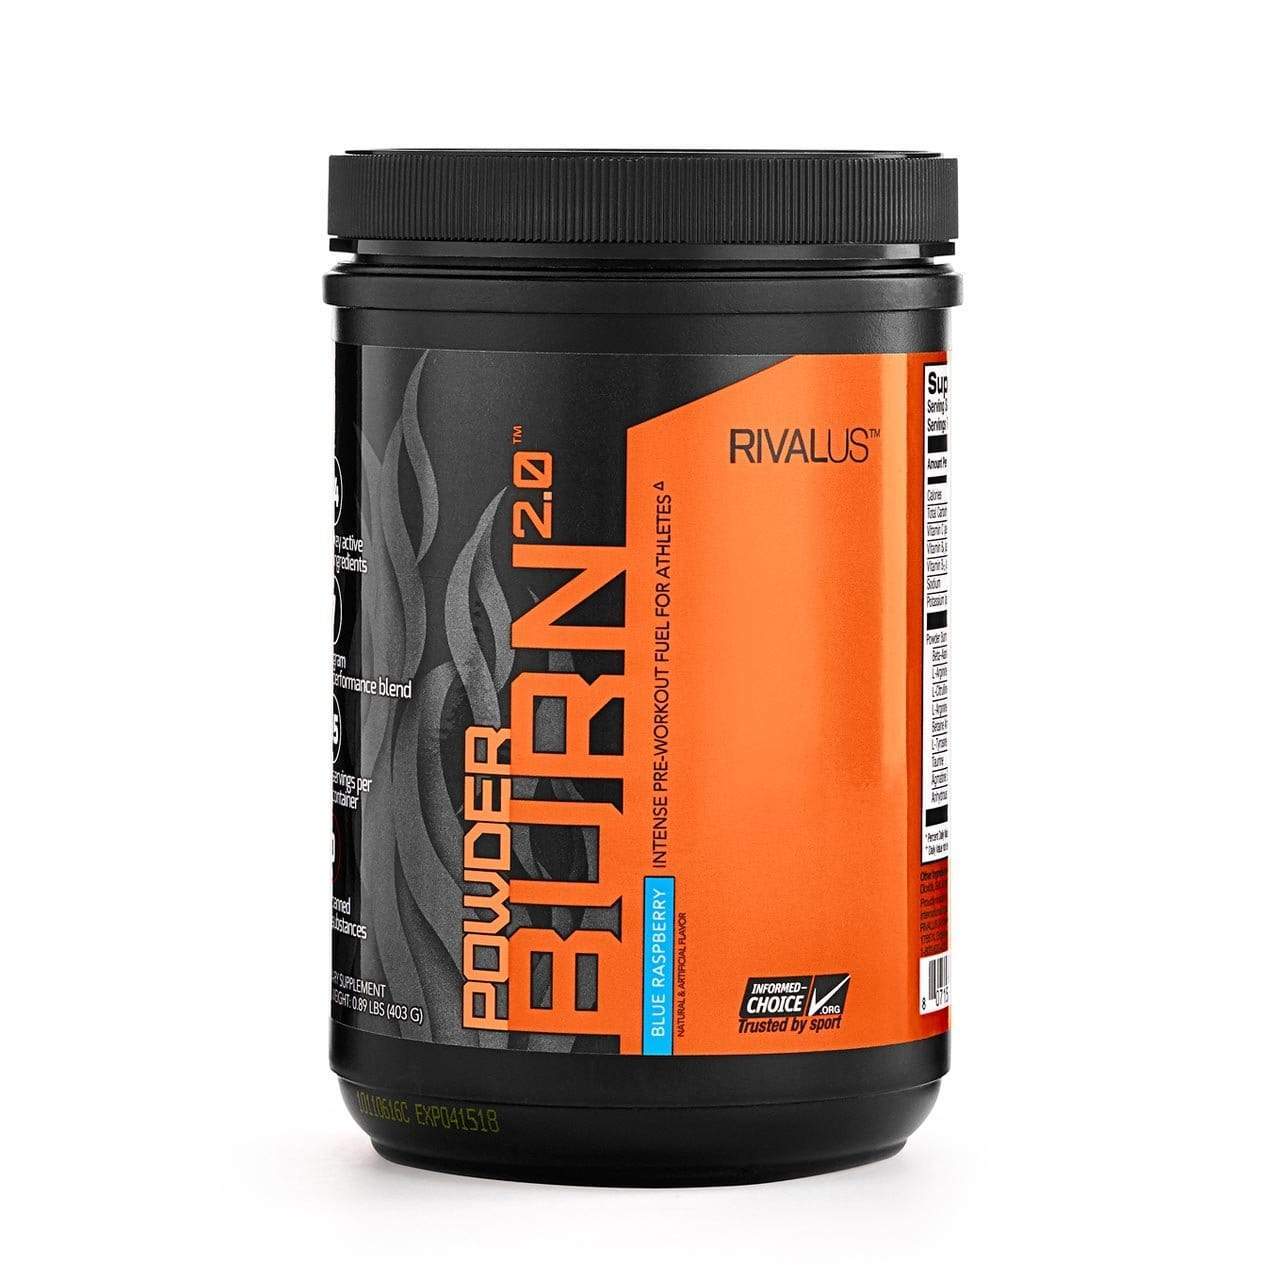 Rivalus Powder Burn 2.0 – Inner Strength Products